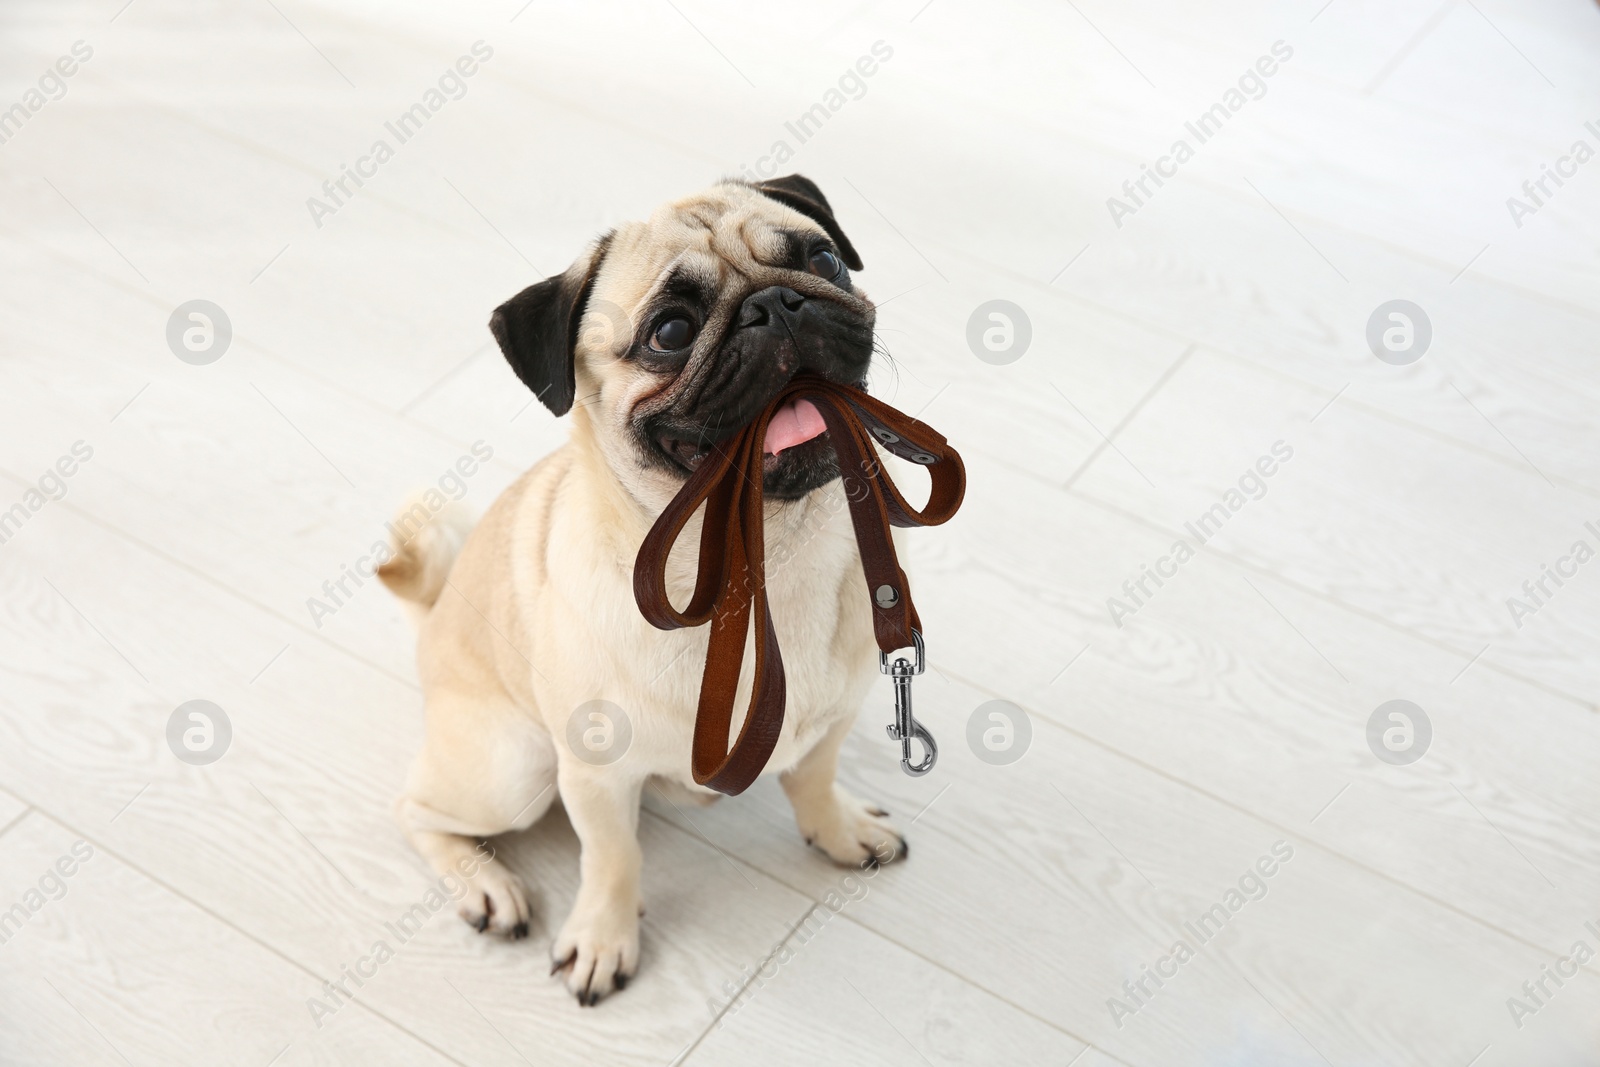 Image of Adorable pug dog holding leash in mouth indoors